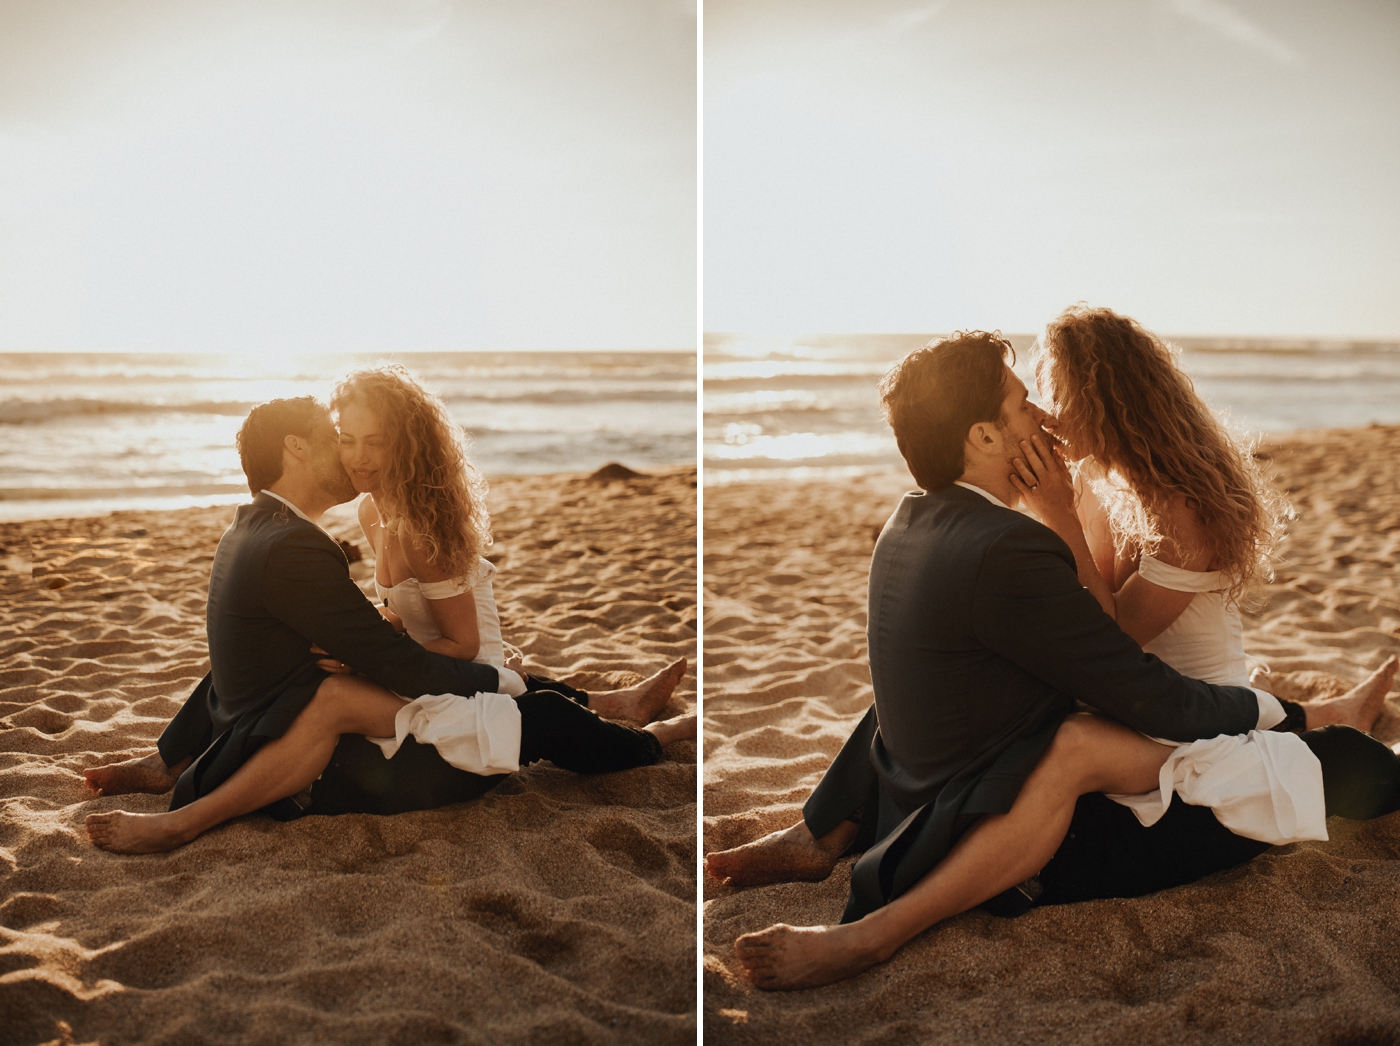 Stefanie and Cameron’s sunset engagement session at Gray Whale Cove by Juju Photography